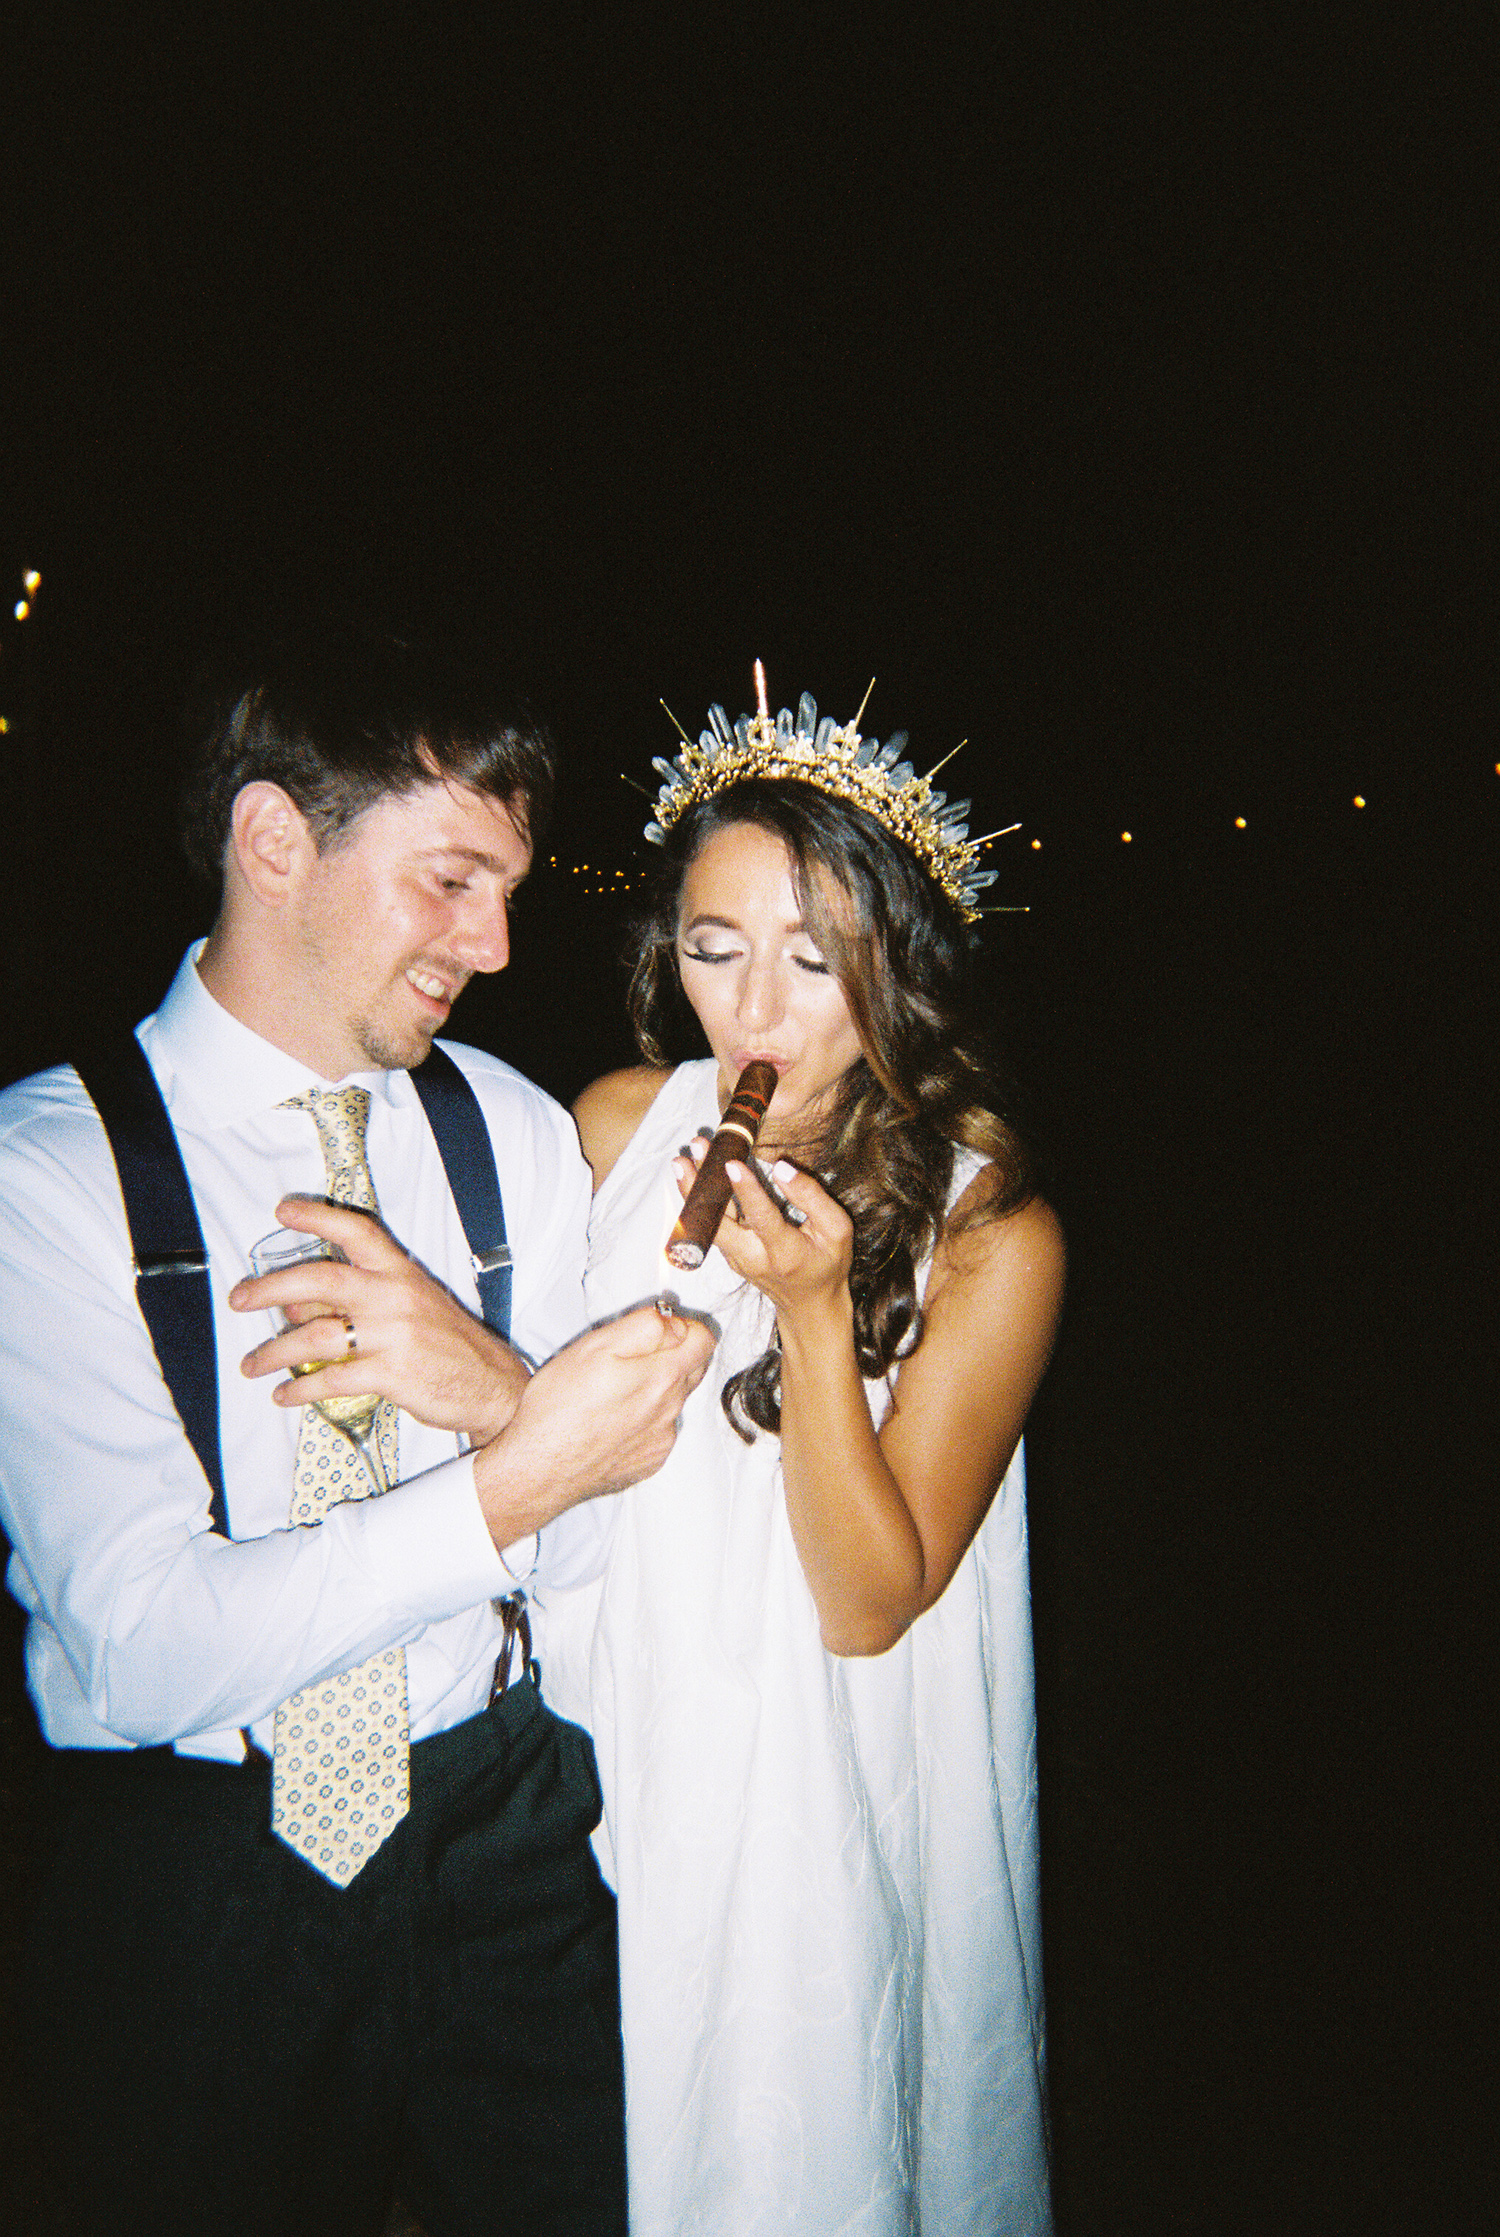 Adirondack Mountain Wedding | Champagne + Cigars at the end of the night pictures shot on a disposable camera | Photographed by Mary Dougherty